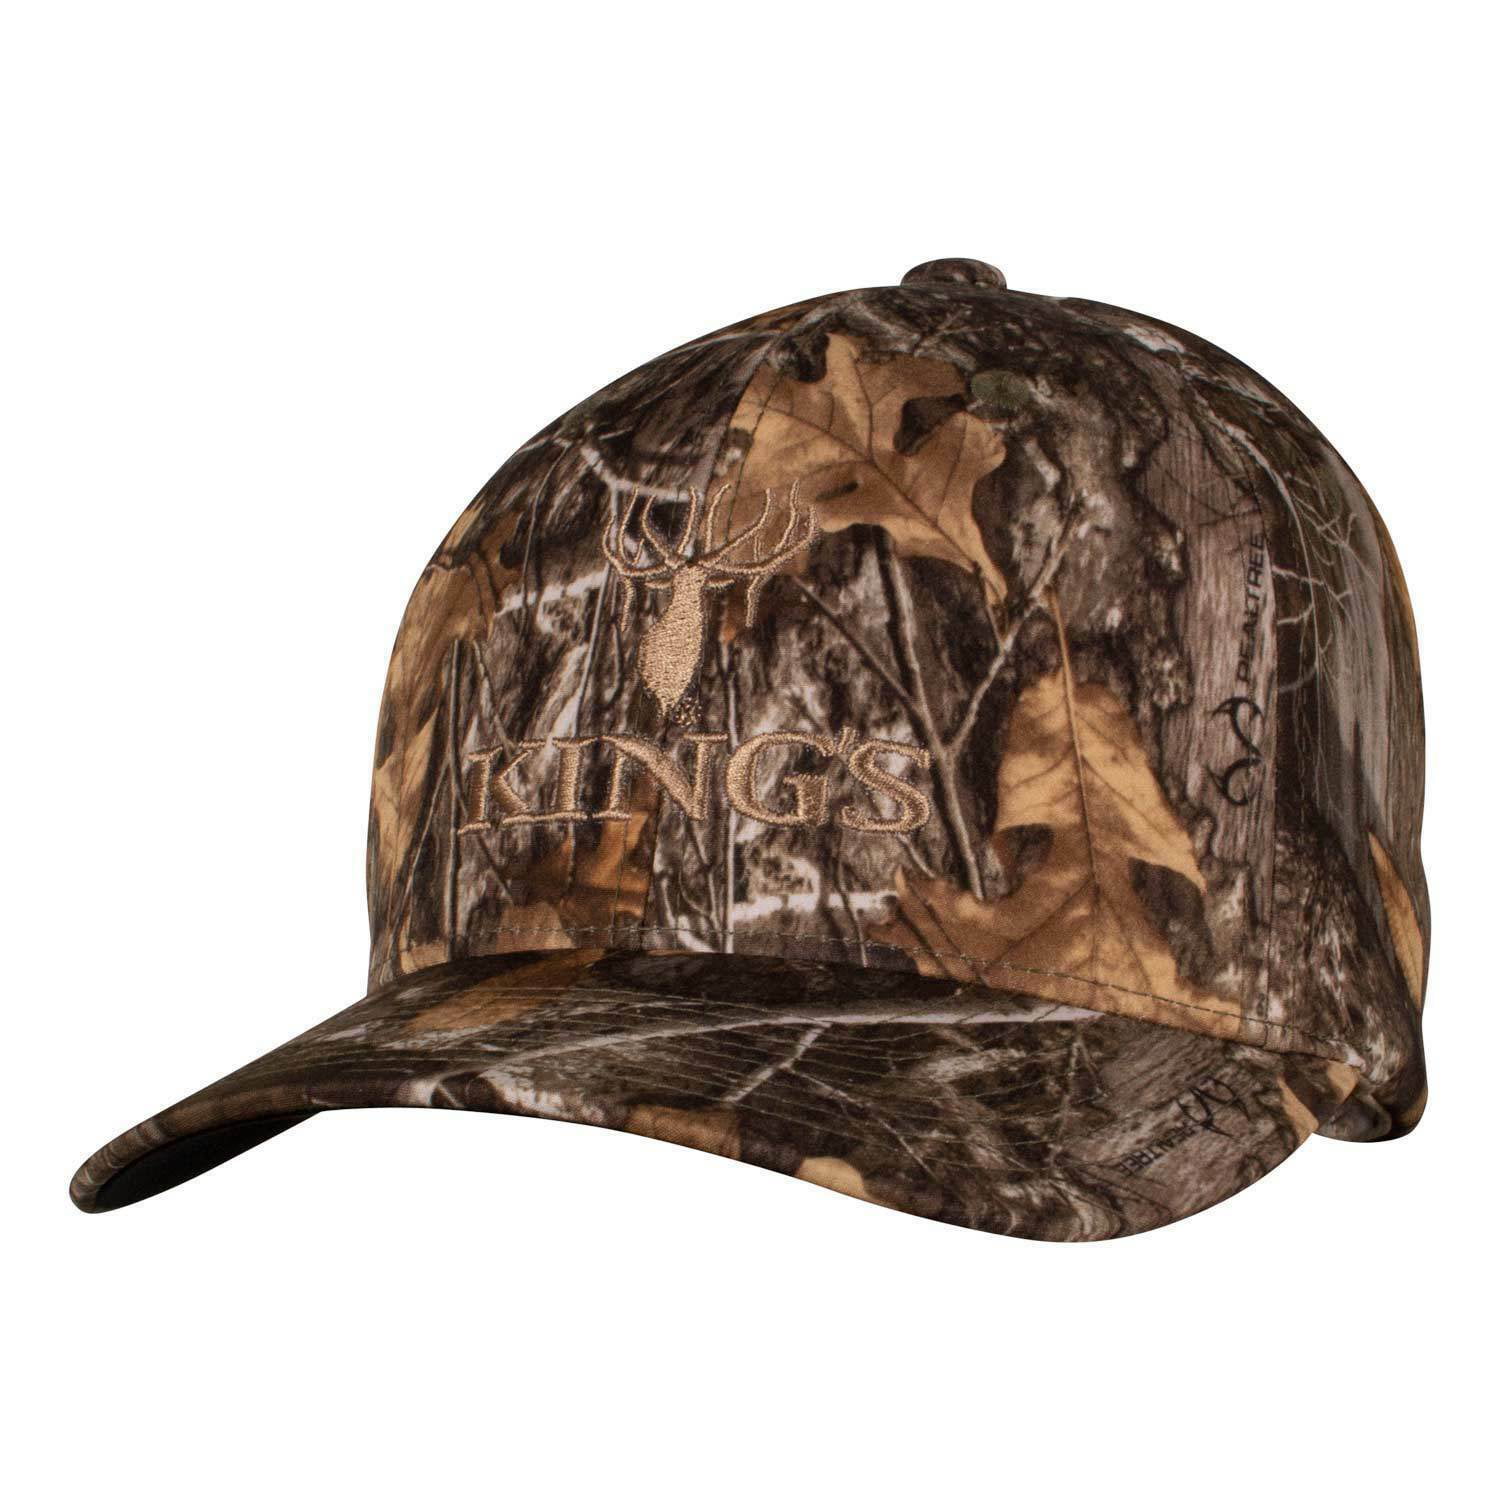 "BUILT FORD TOUGH" Truetimber Camo Adjustable Hat with Hunter Orange Accents 